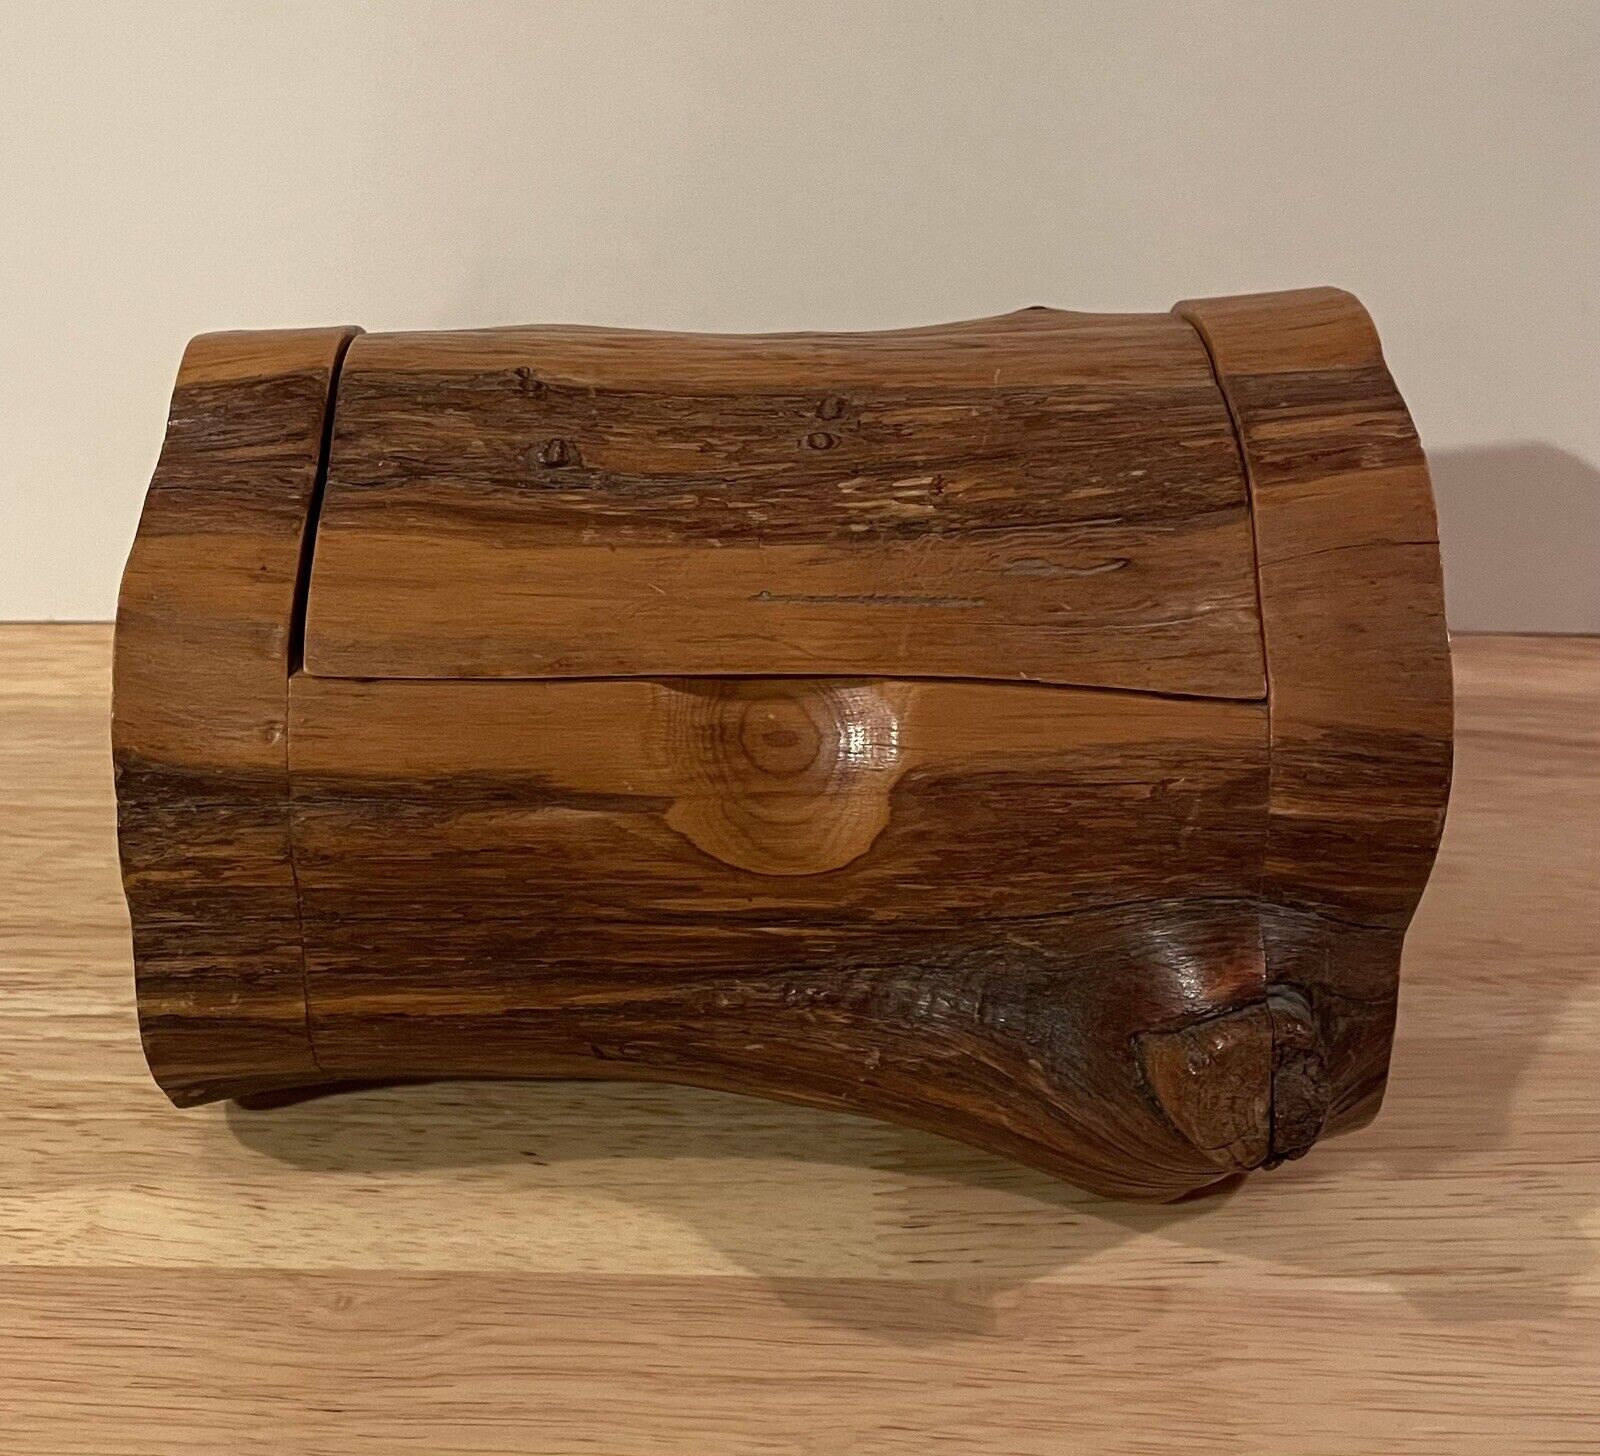 QUALITY + VINTAGE [HAND CRAFTED]  HINDGED LID WOODEN  STASH BOX